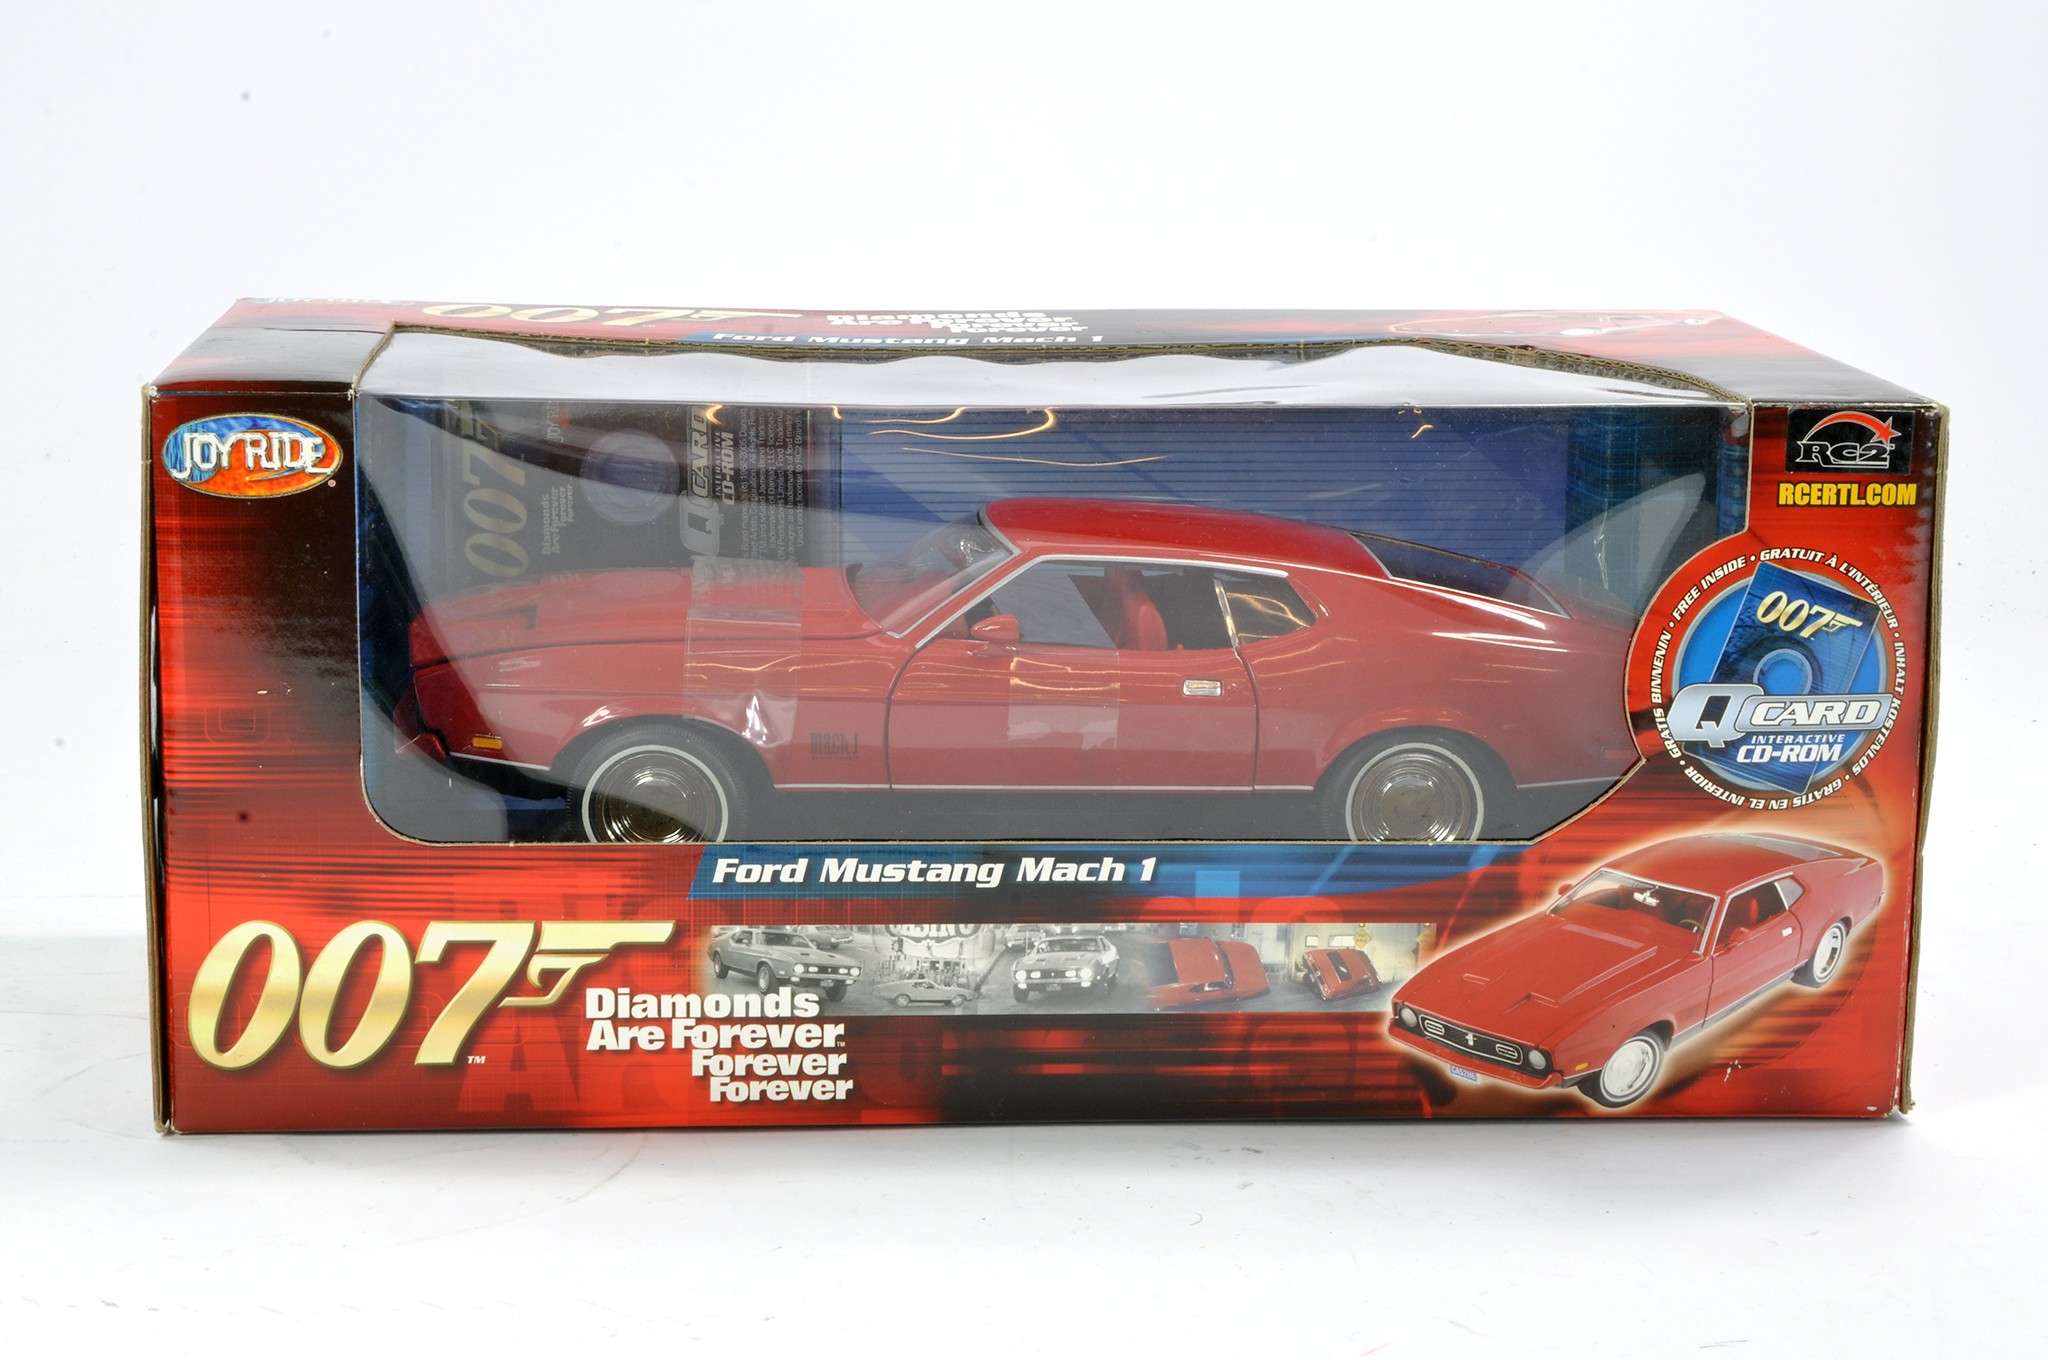 James Bond 007 Joyride Diamonds are Forever Ford Mustang MK1. Excellent, looks to be unopened.